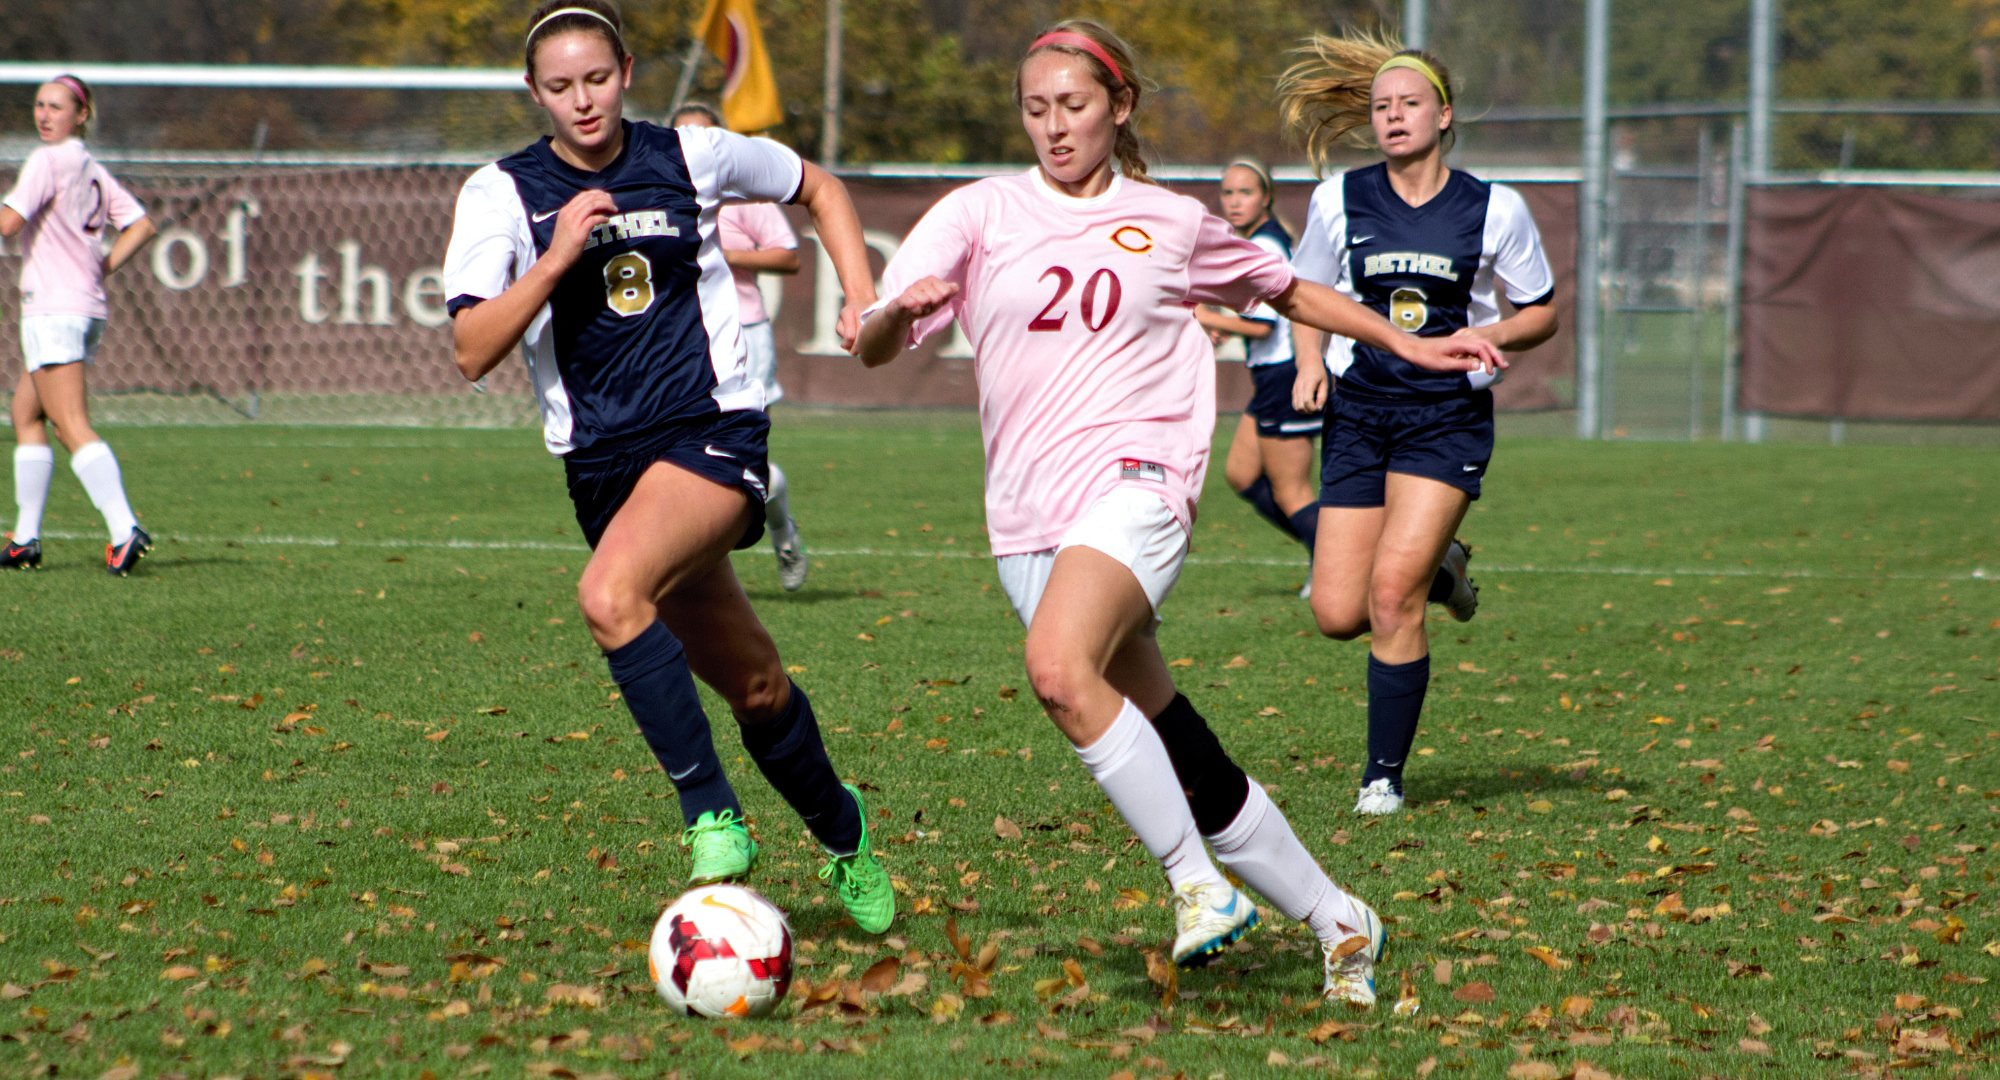 Senior Emily Wendorff attacks the Bethel net in the first half of the Cobbers' game against the Royals. Wendorff scored both of CC's goals in the game.